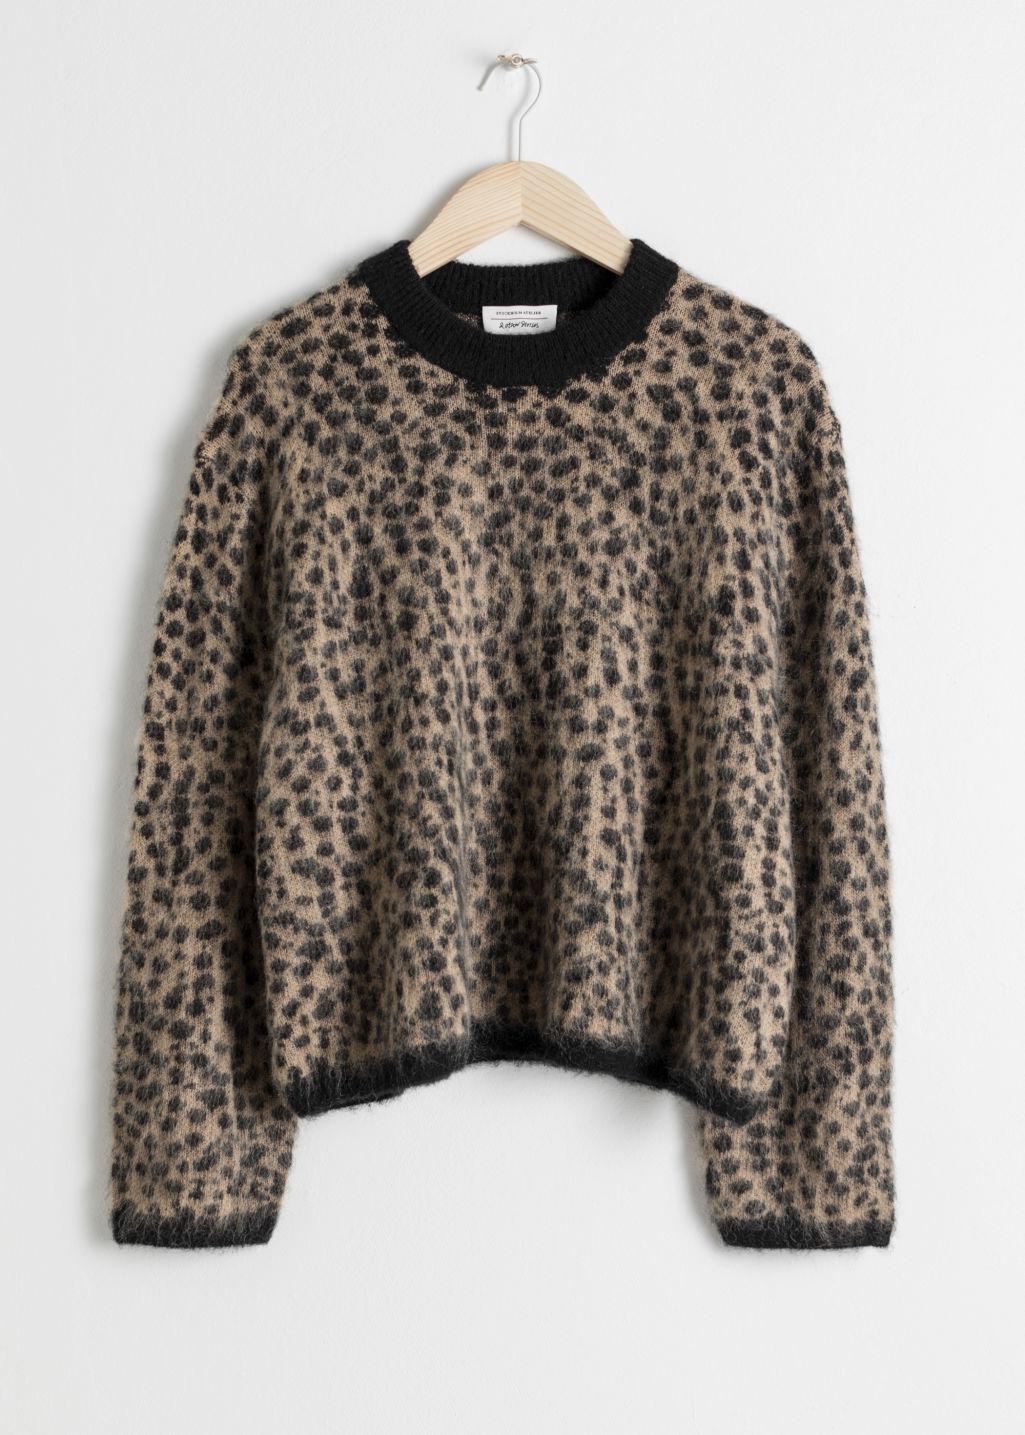 & Other Stories Wool Leopard Knit Sweater in Beige (Natural) - Lyst